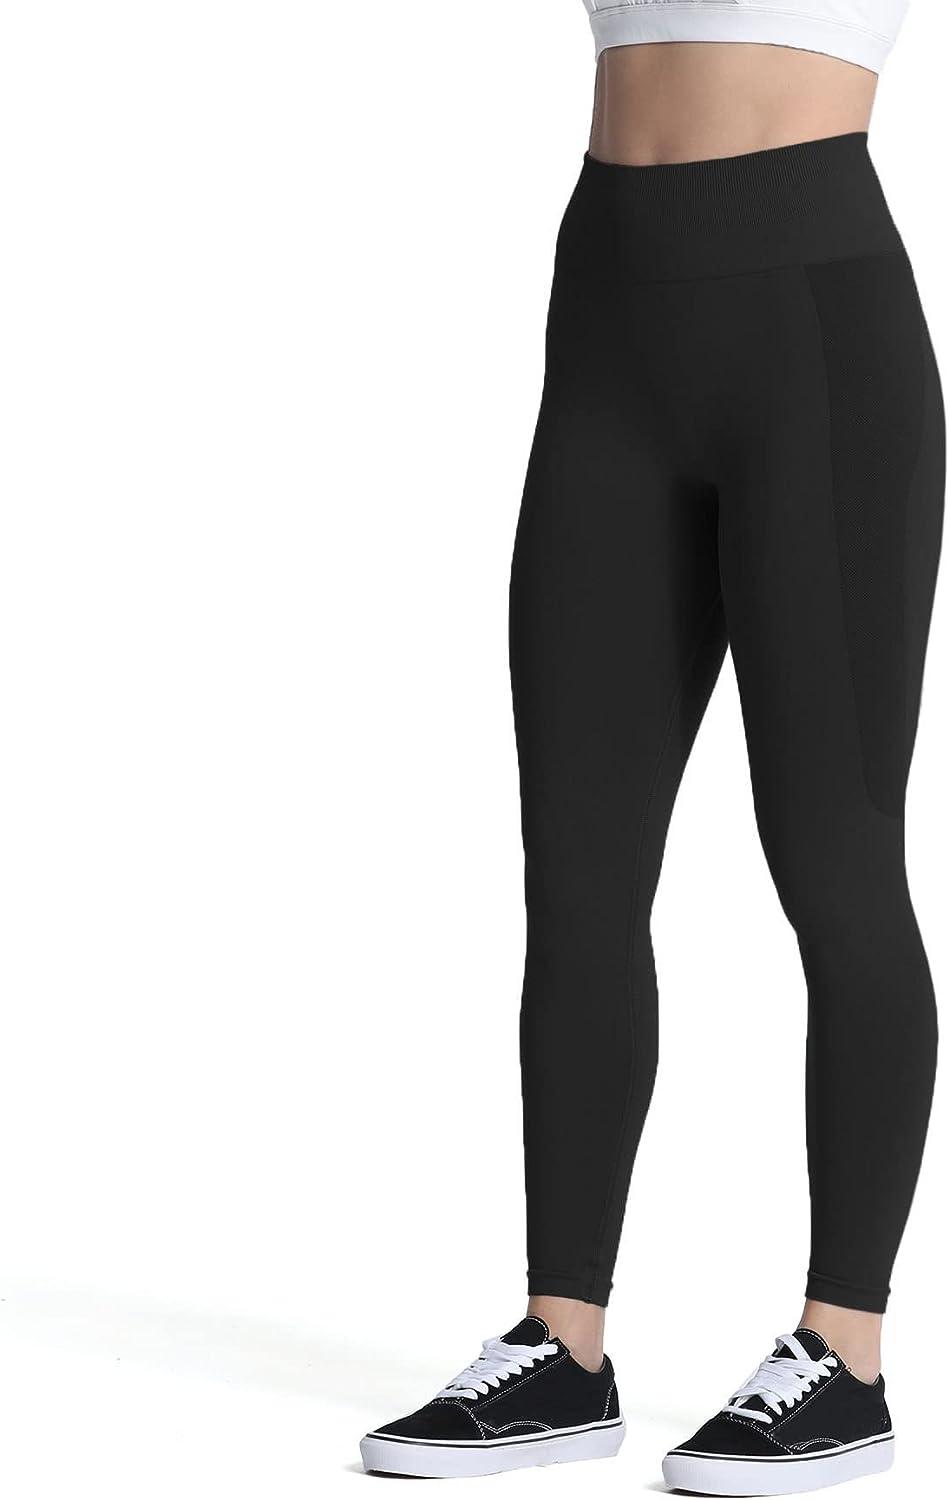 Aoxjox Seamless Scrunch Legging for Women Asset Tummy Control Workout Gym  Fitness Sport Active Yoga Pants A Black Large